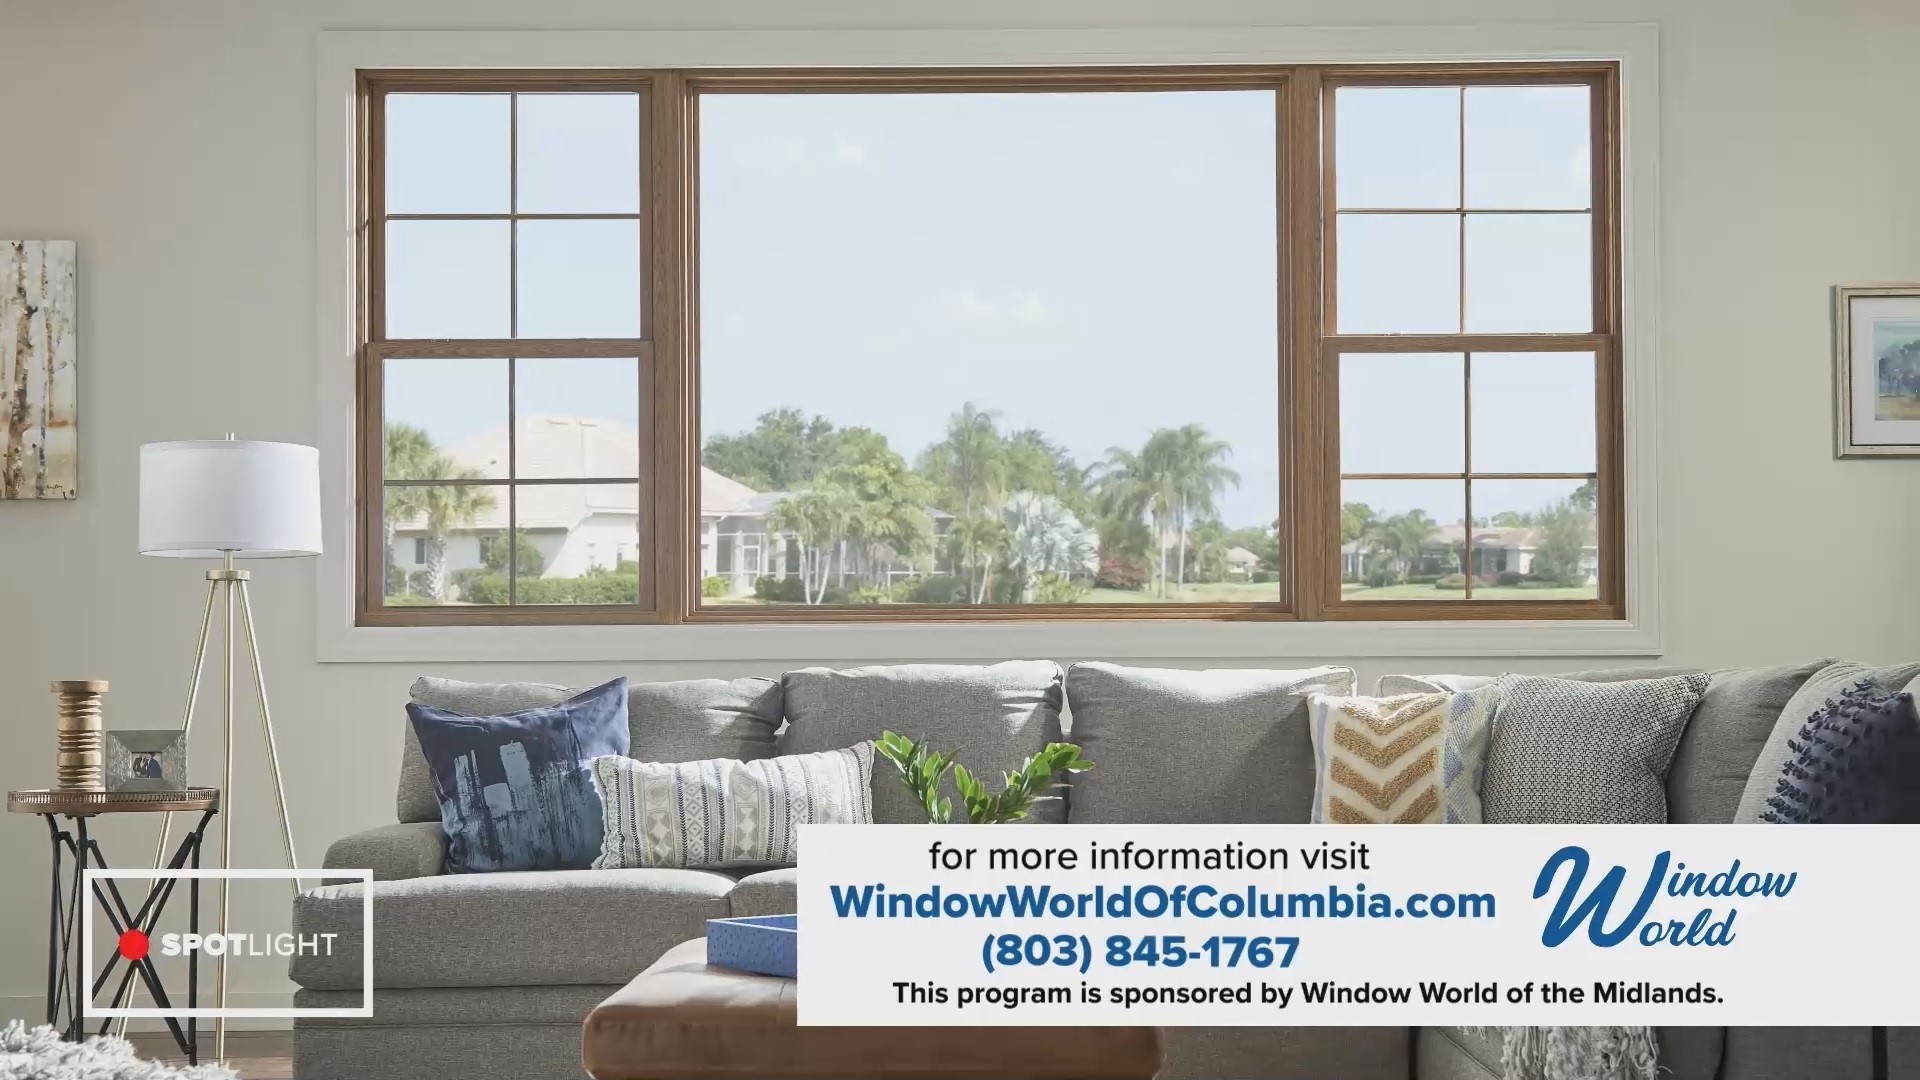 Tweaks of the Trade: Window World expert shares small ways to save money around your home!